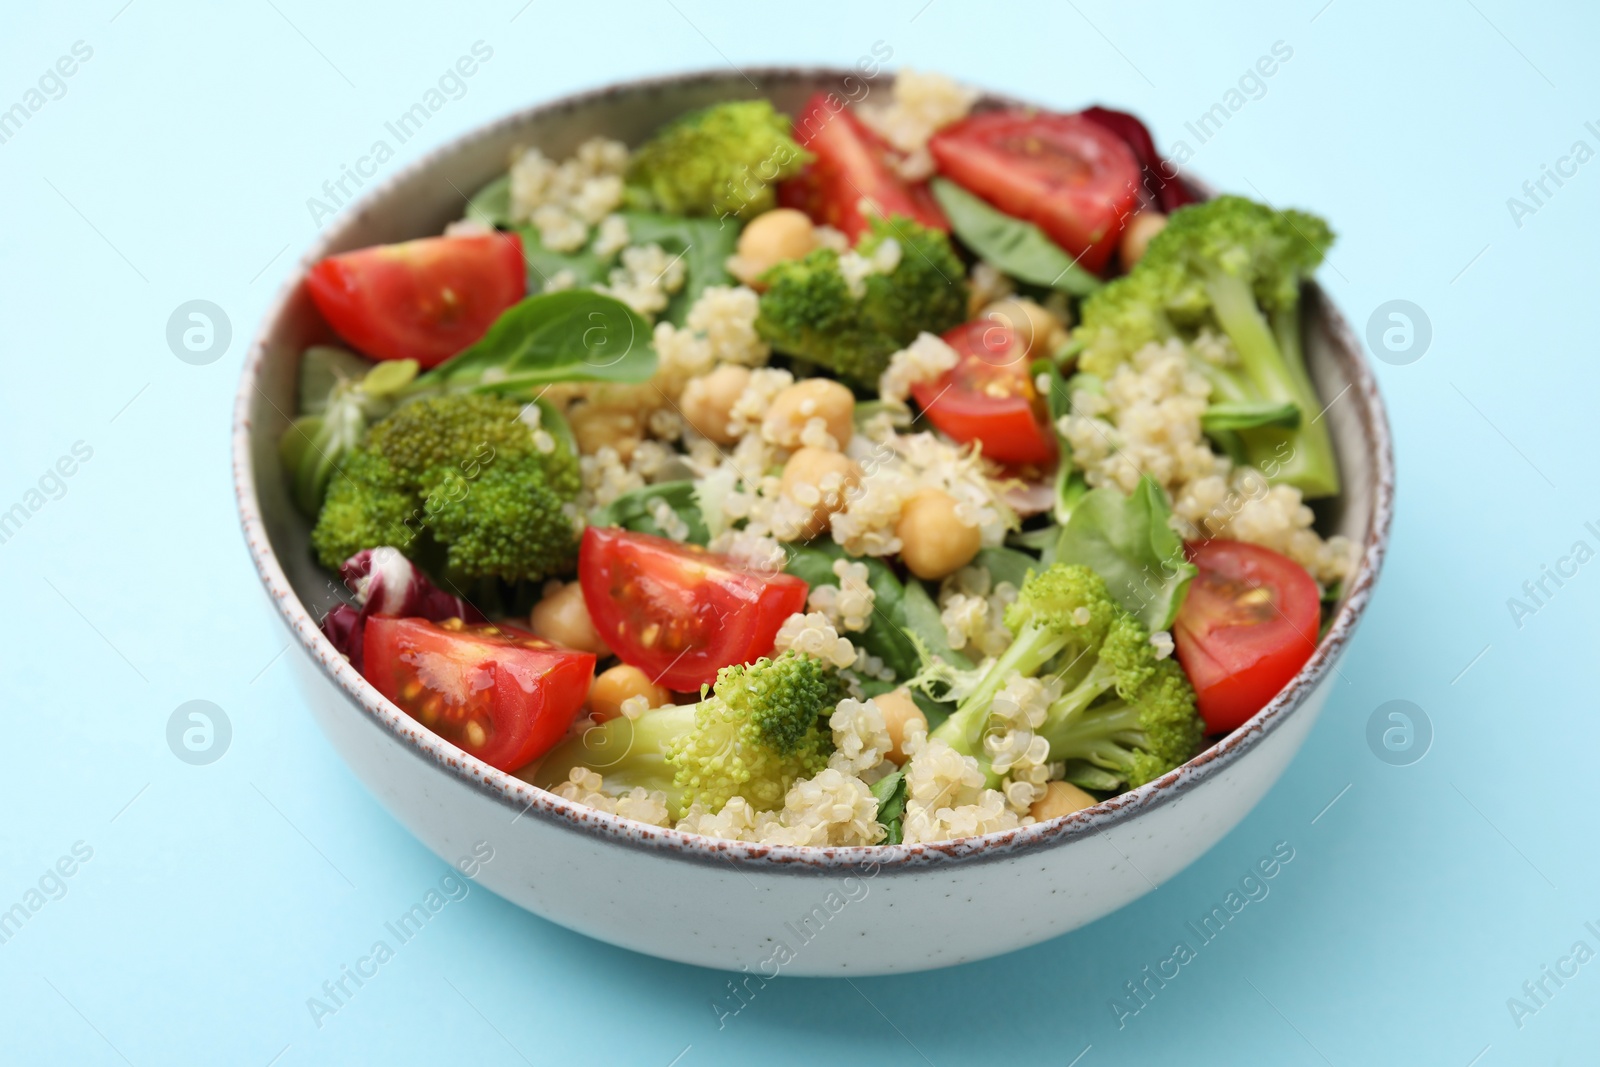 Photo of Healthy meal. Tasty salad with quinoa, chickpeas and vegetables on light blue table, closeup